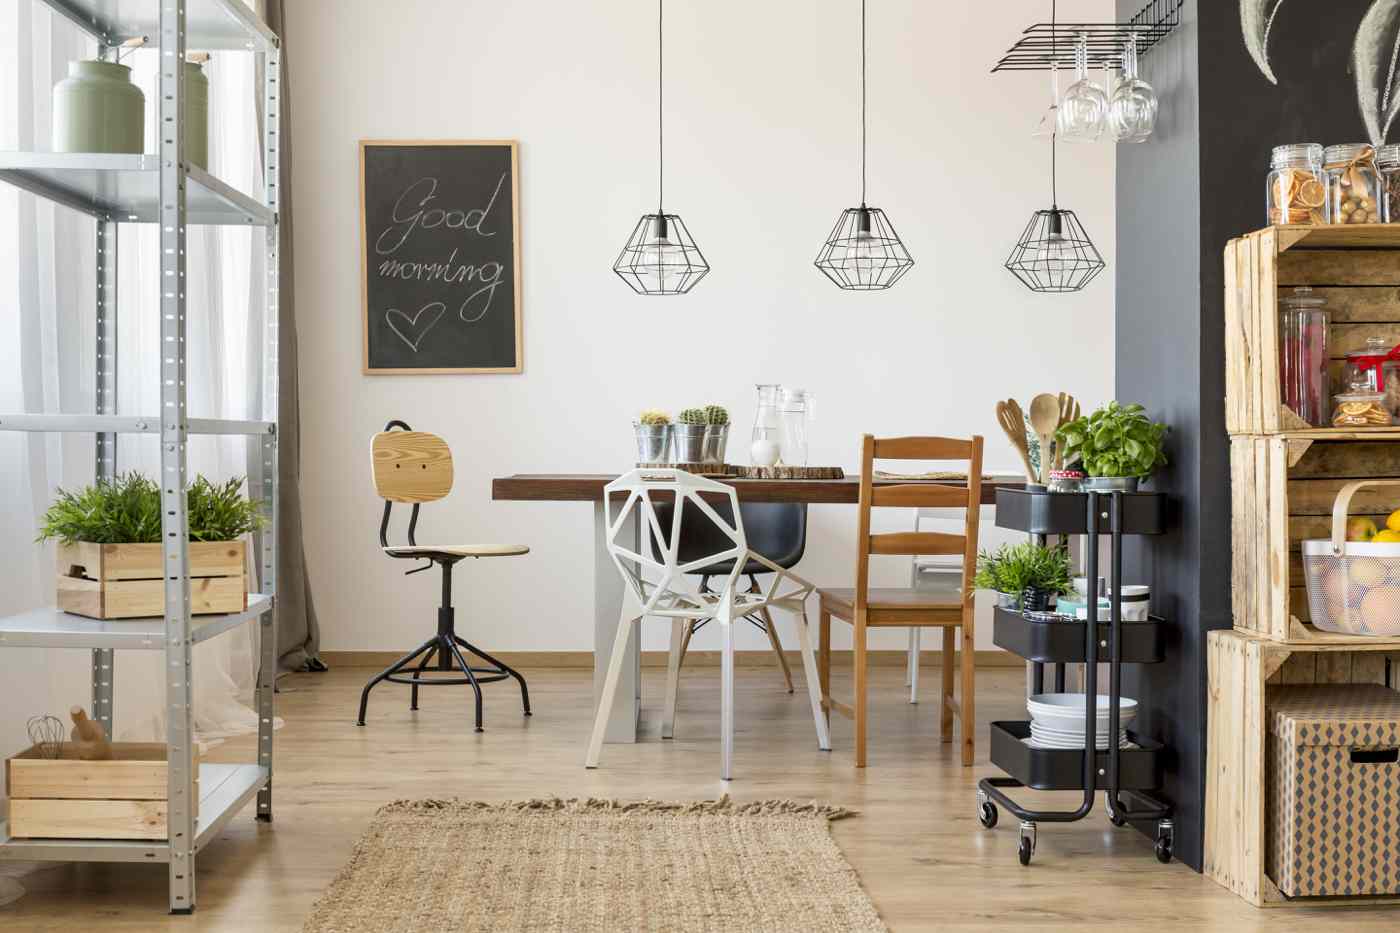 Industrial-style dining room decorating wooden and metal chairs combine decorative pendant lights as an accent in the room